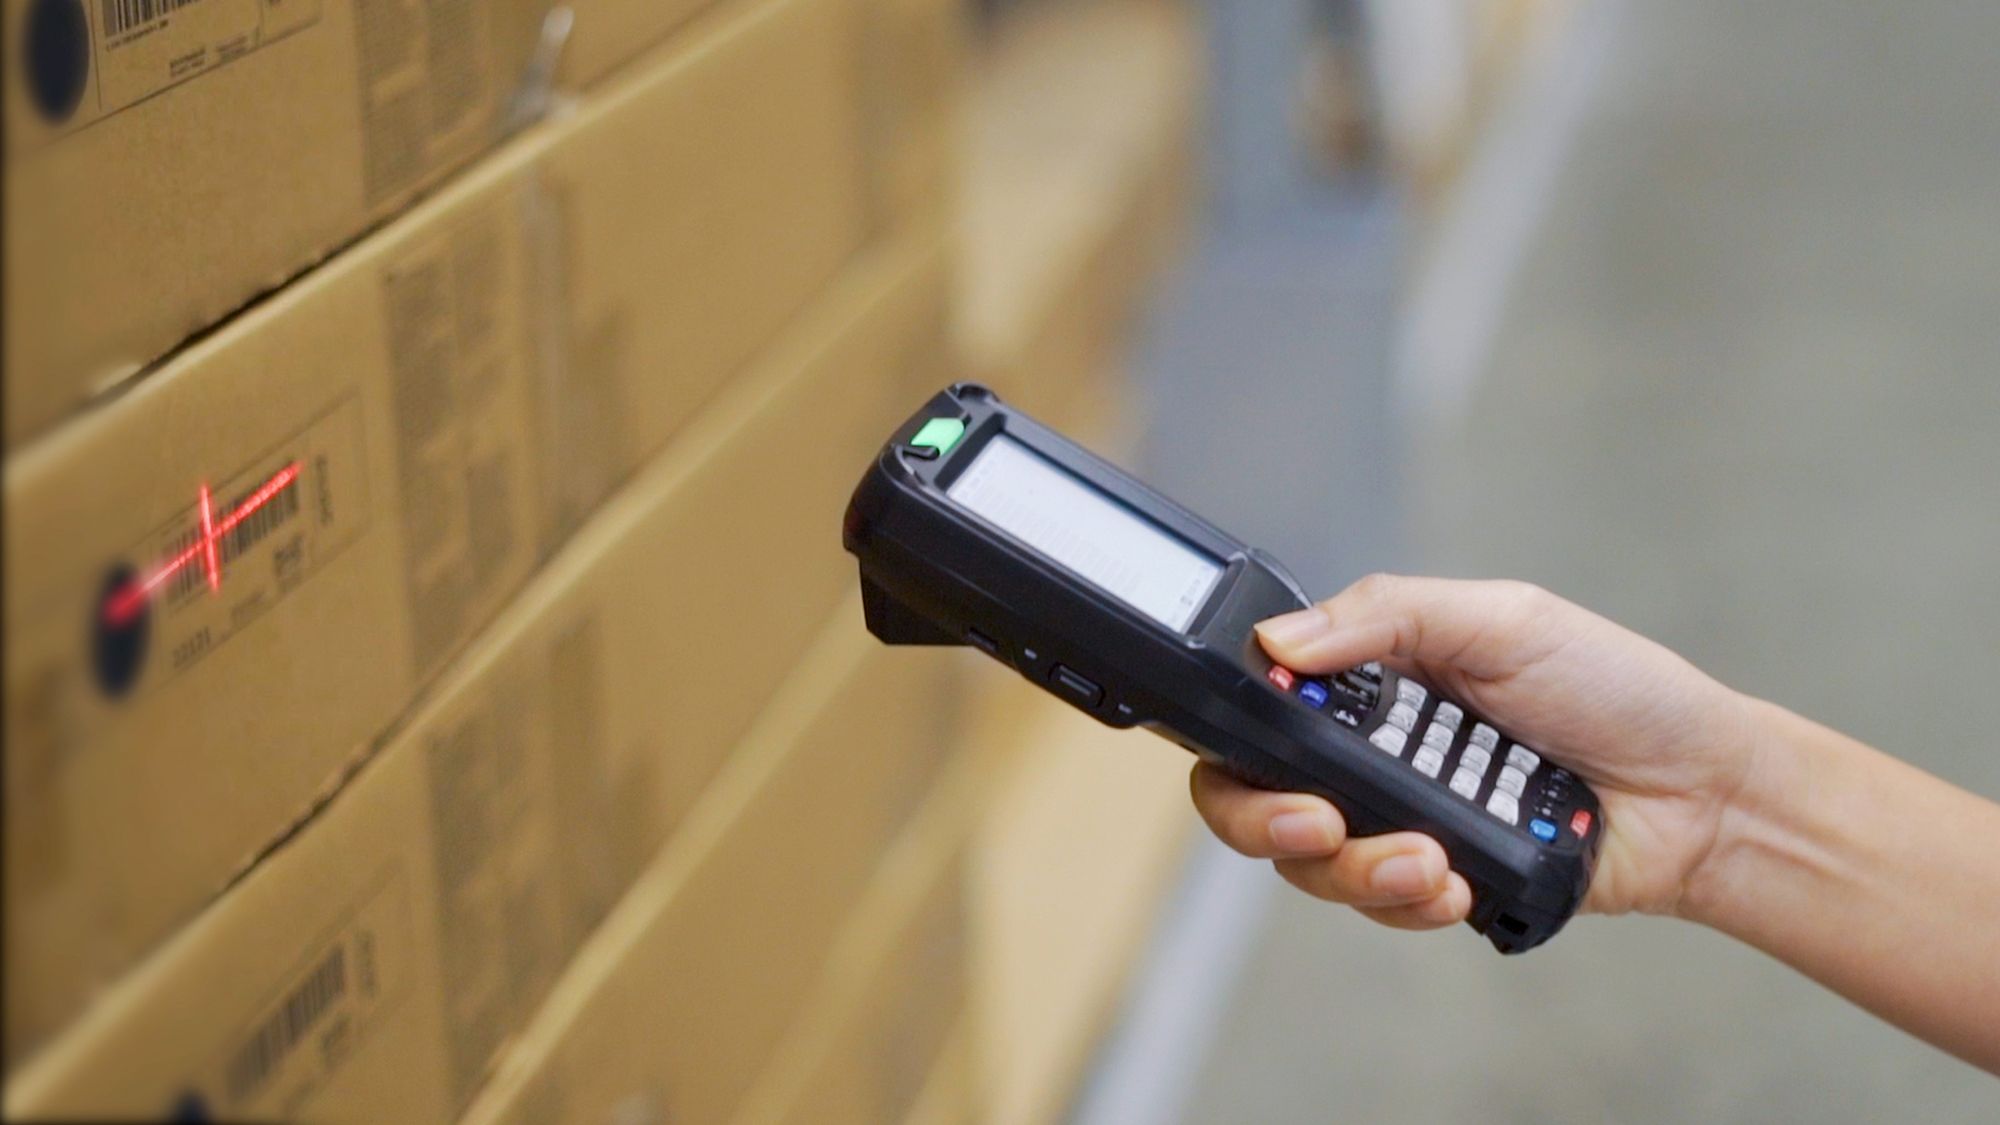 Worker using a barcode scanner on product